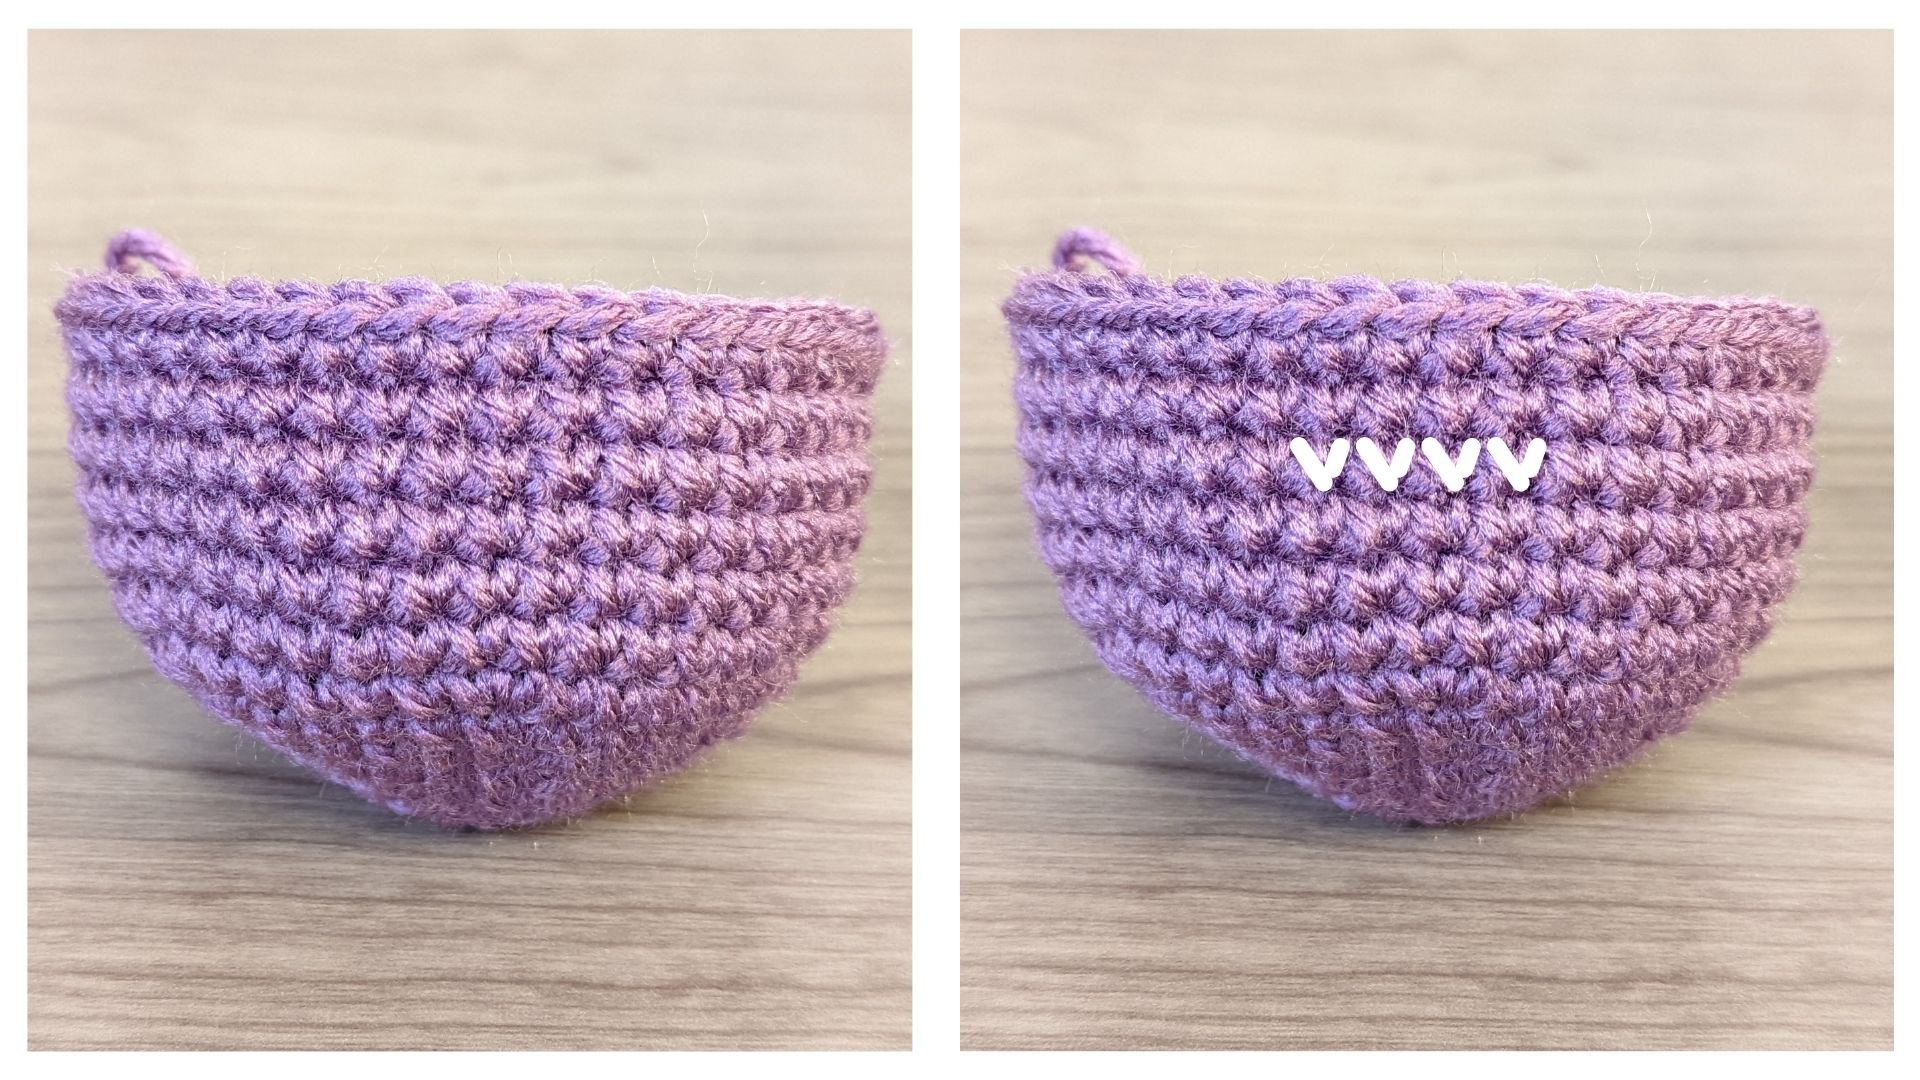 The difference between the V and the X shaped single crochet (yarn